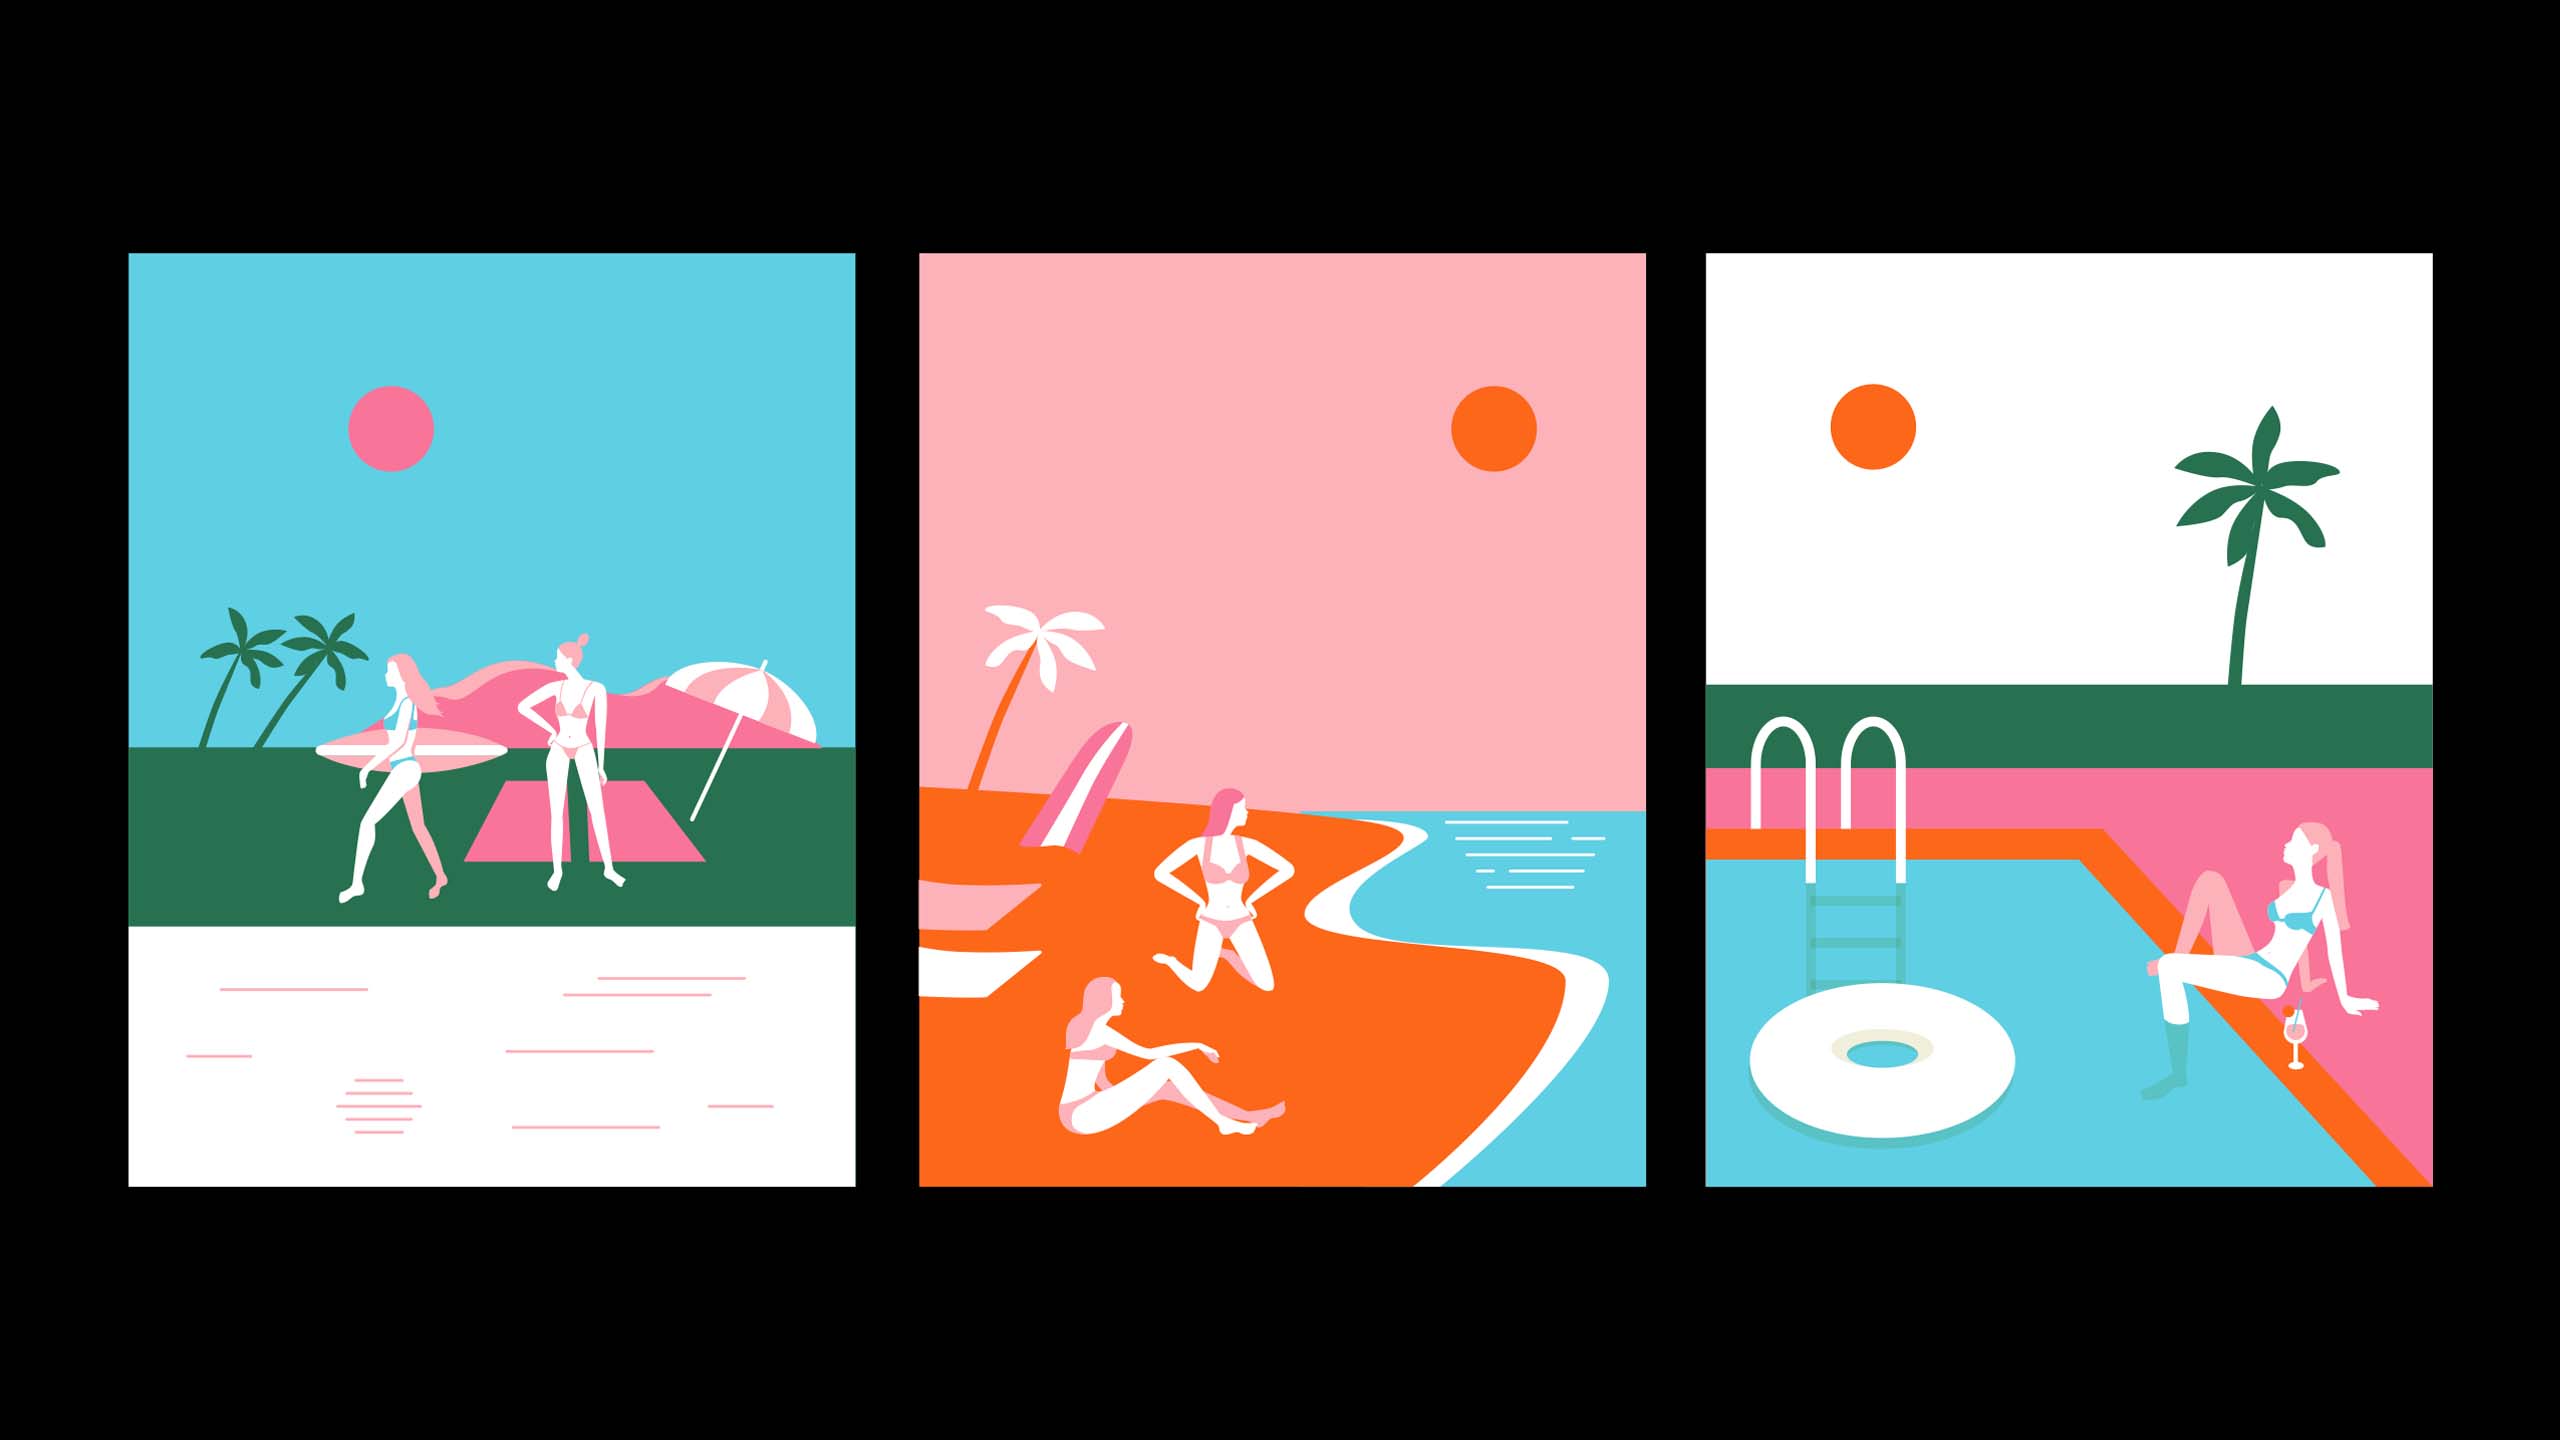 Colorful posters and illustrations designed for swimwear brand Blackbough